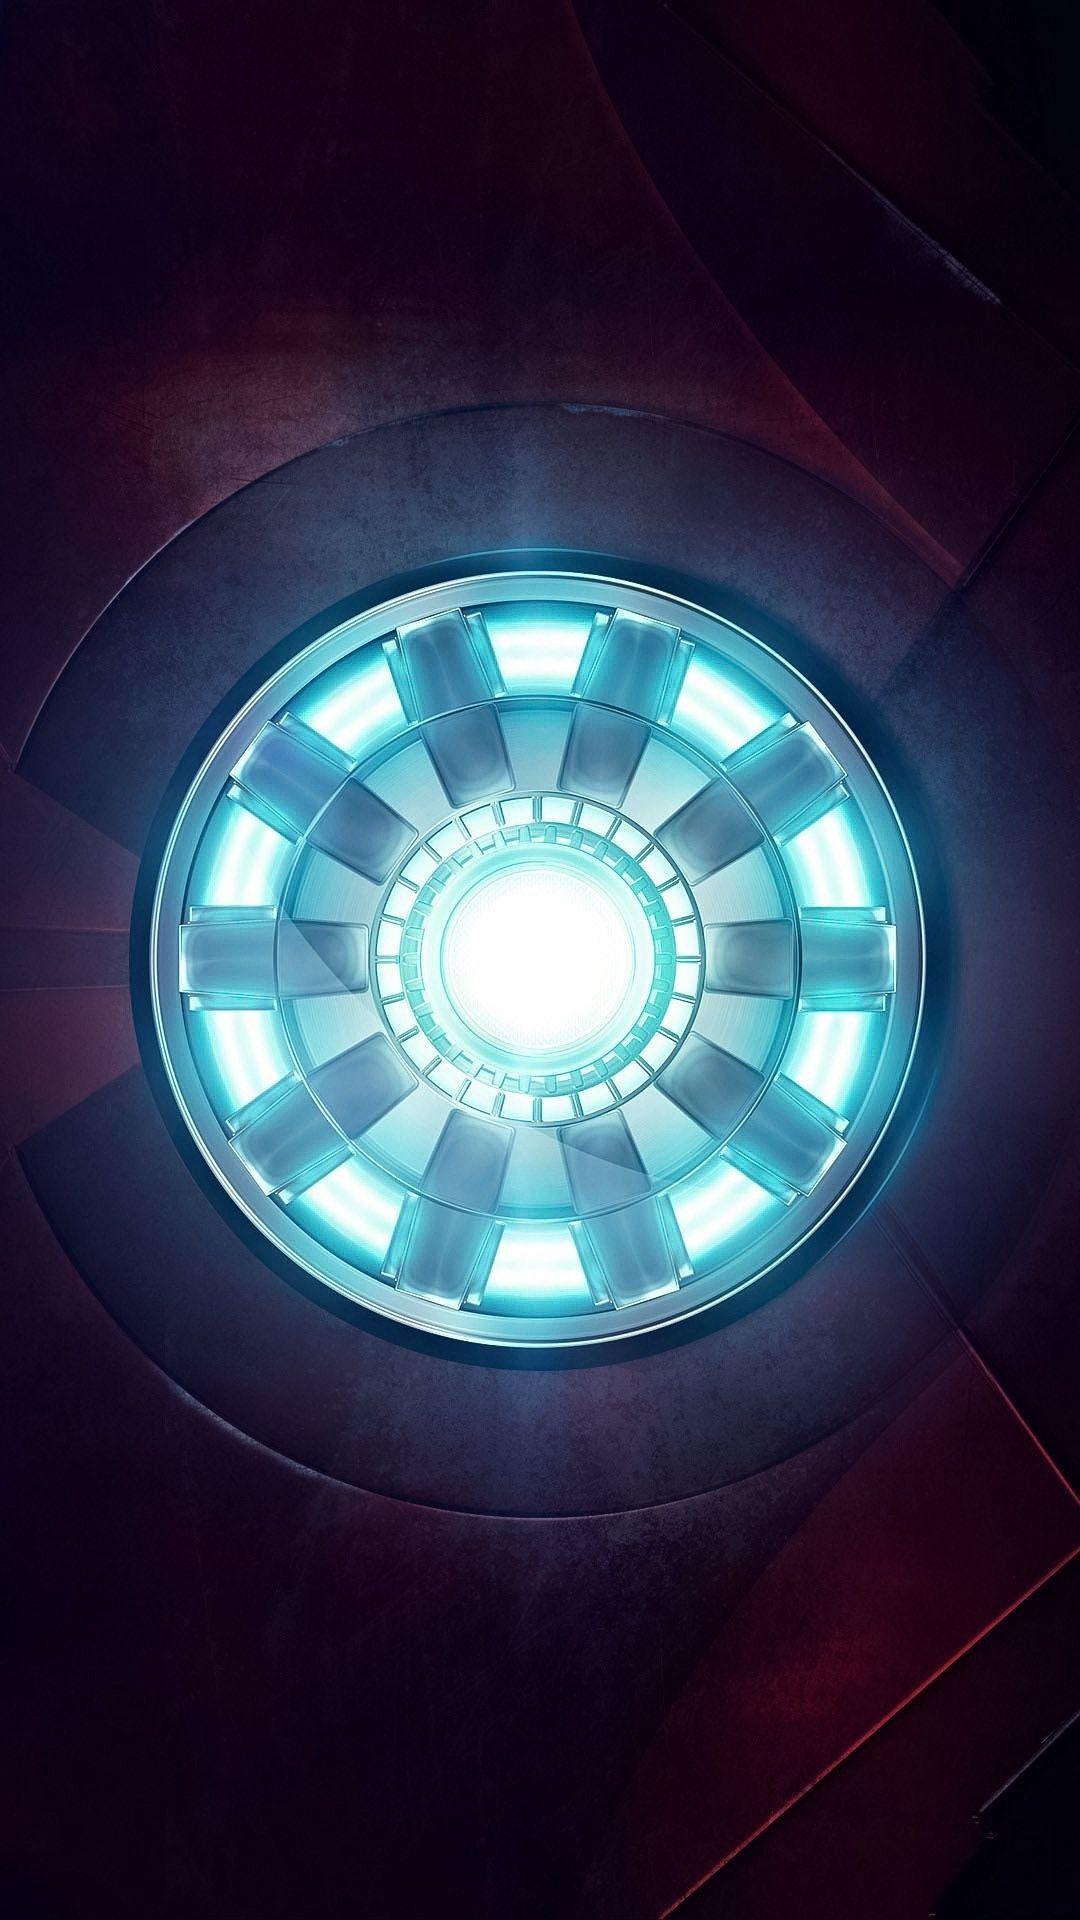 Iron Man Arc Reactor Wallpaper now to grab yourself a